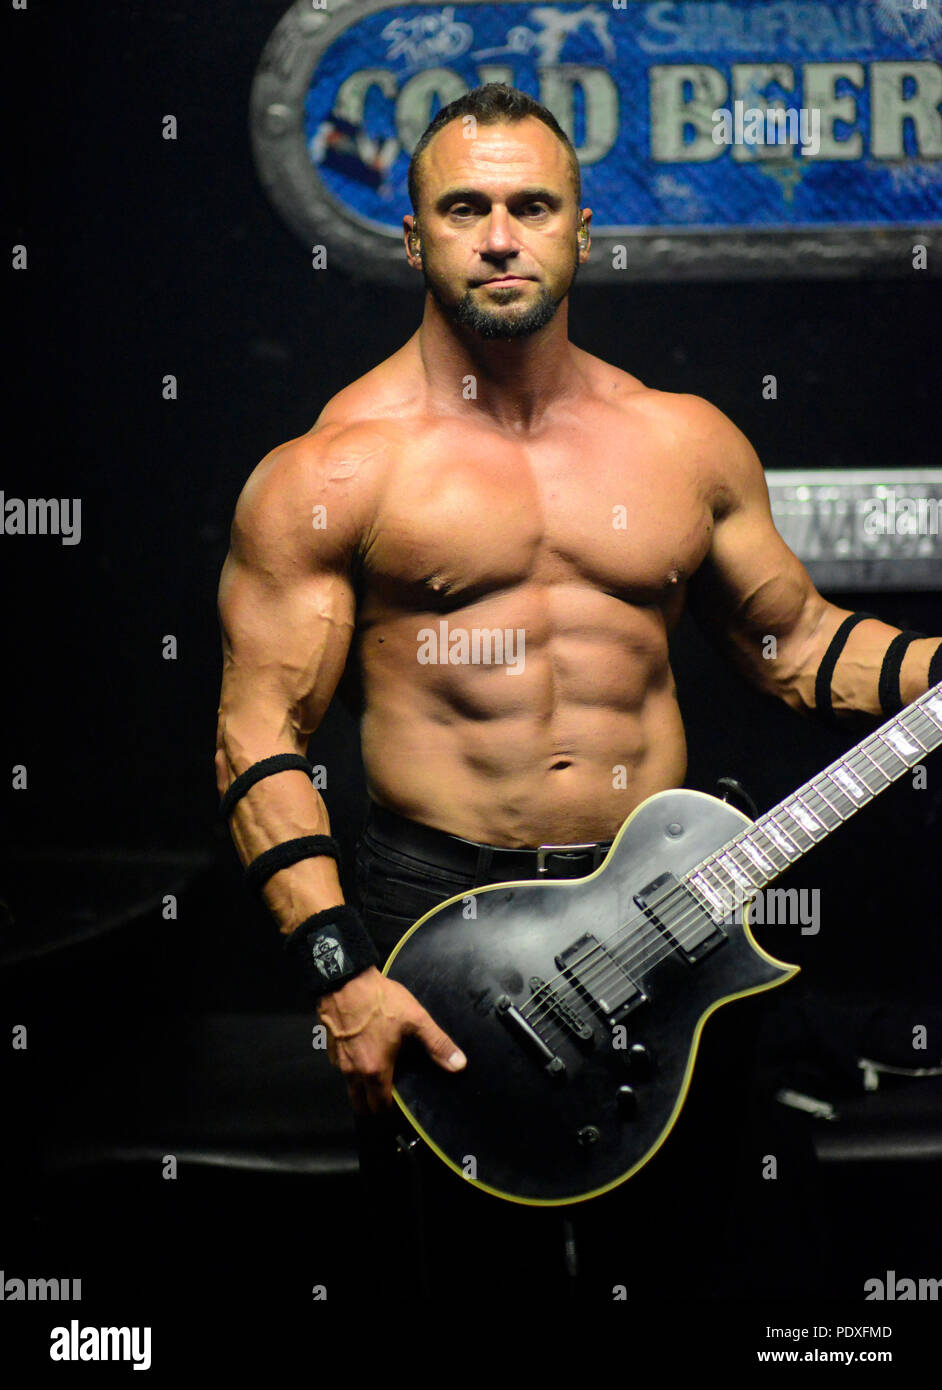 August 8, 2018 - West Hollywood, CA, USA - Musician - ARI MIHAOPOULOS ''ARISTOTLE'' guitars for OTEP, back stage at The Whisky A Go Go, West Hollywood, California, USA, August 8, 2018. OTEP is a Los Angeles based heavy metal band that integrates rap metal, new metal, alternative metal into their sound.  OTEP is an anagram for poet.  Otep Shamaya descibes the bands sound as, ''art house nu-metal.''  ..Image Credit  cr  Scott Mitchell/ZUMA Press (Credit Image: © Scott Mitchell via ZUMA Wire) Stock Photo